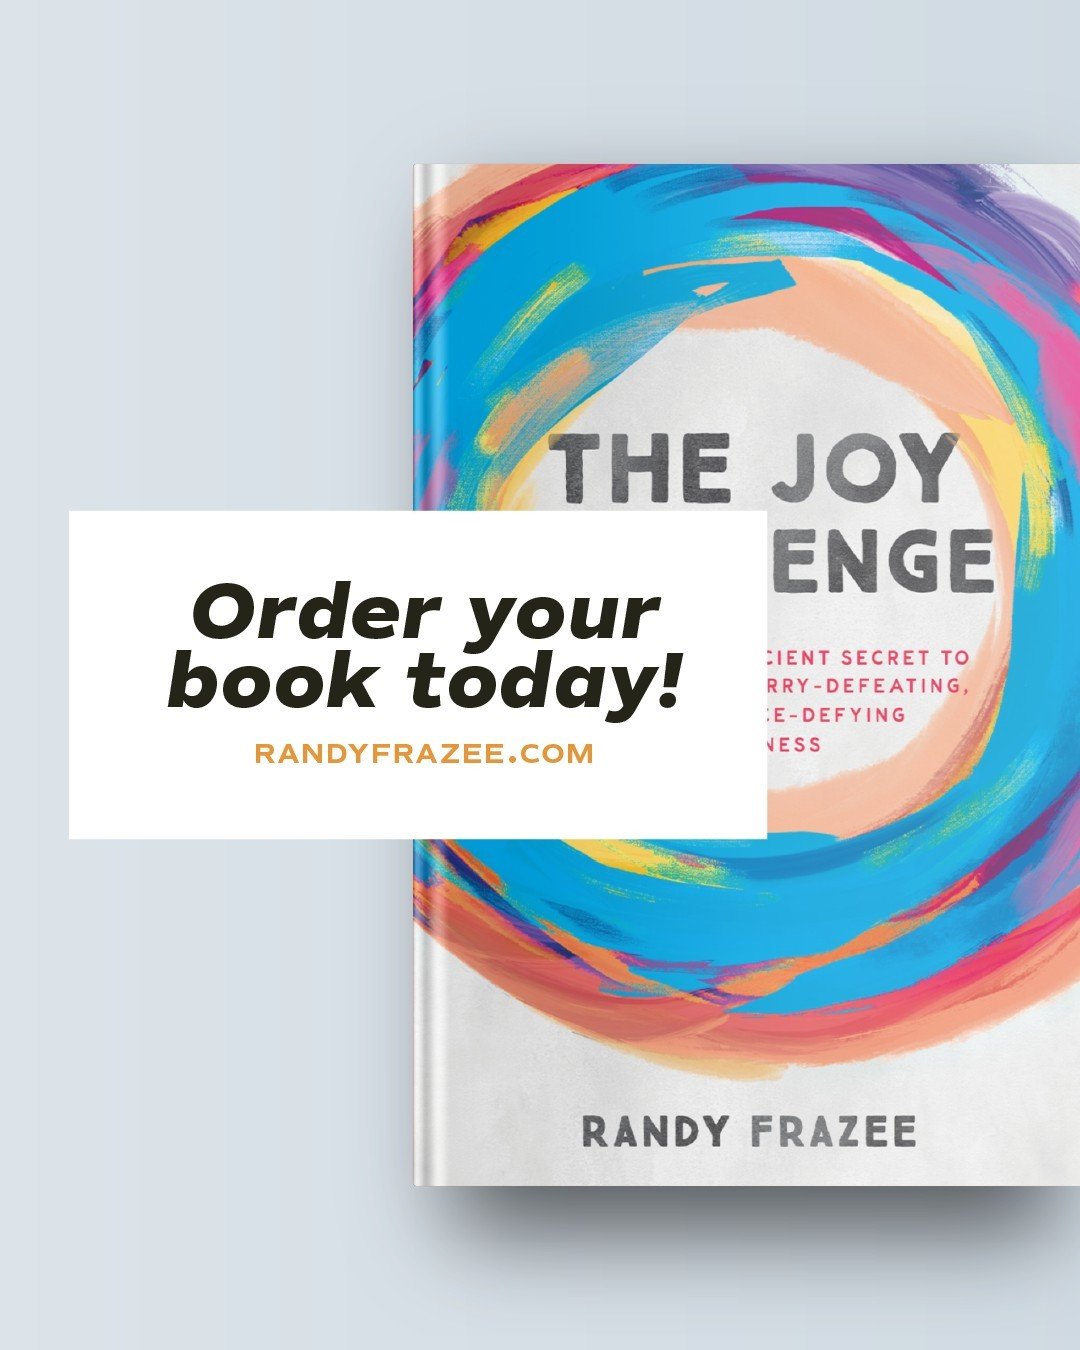 🎉 Pre-order your Joy Challenge book by May 9th
 
Pre-ordering the Joy Challenge book ensures that you will receive your copy, guaranteeing your access to this life-changing series. The Joy Challenge teaching series is a transformative experience des